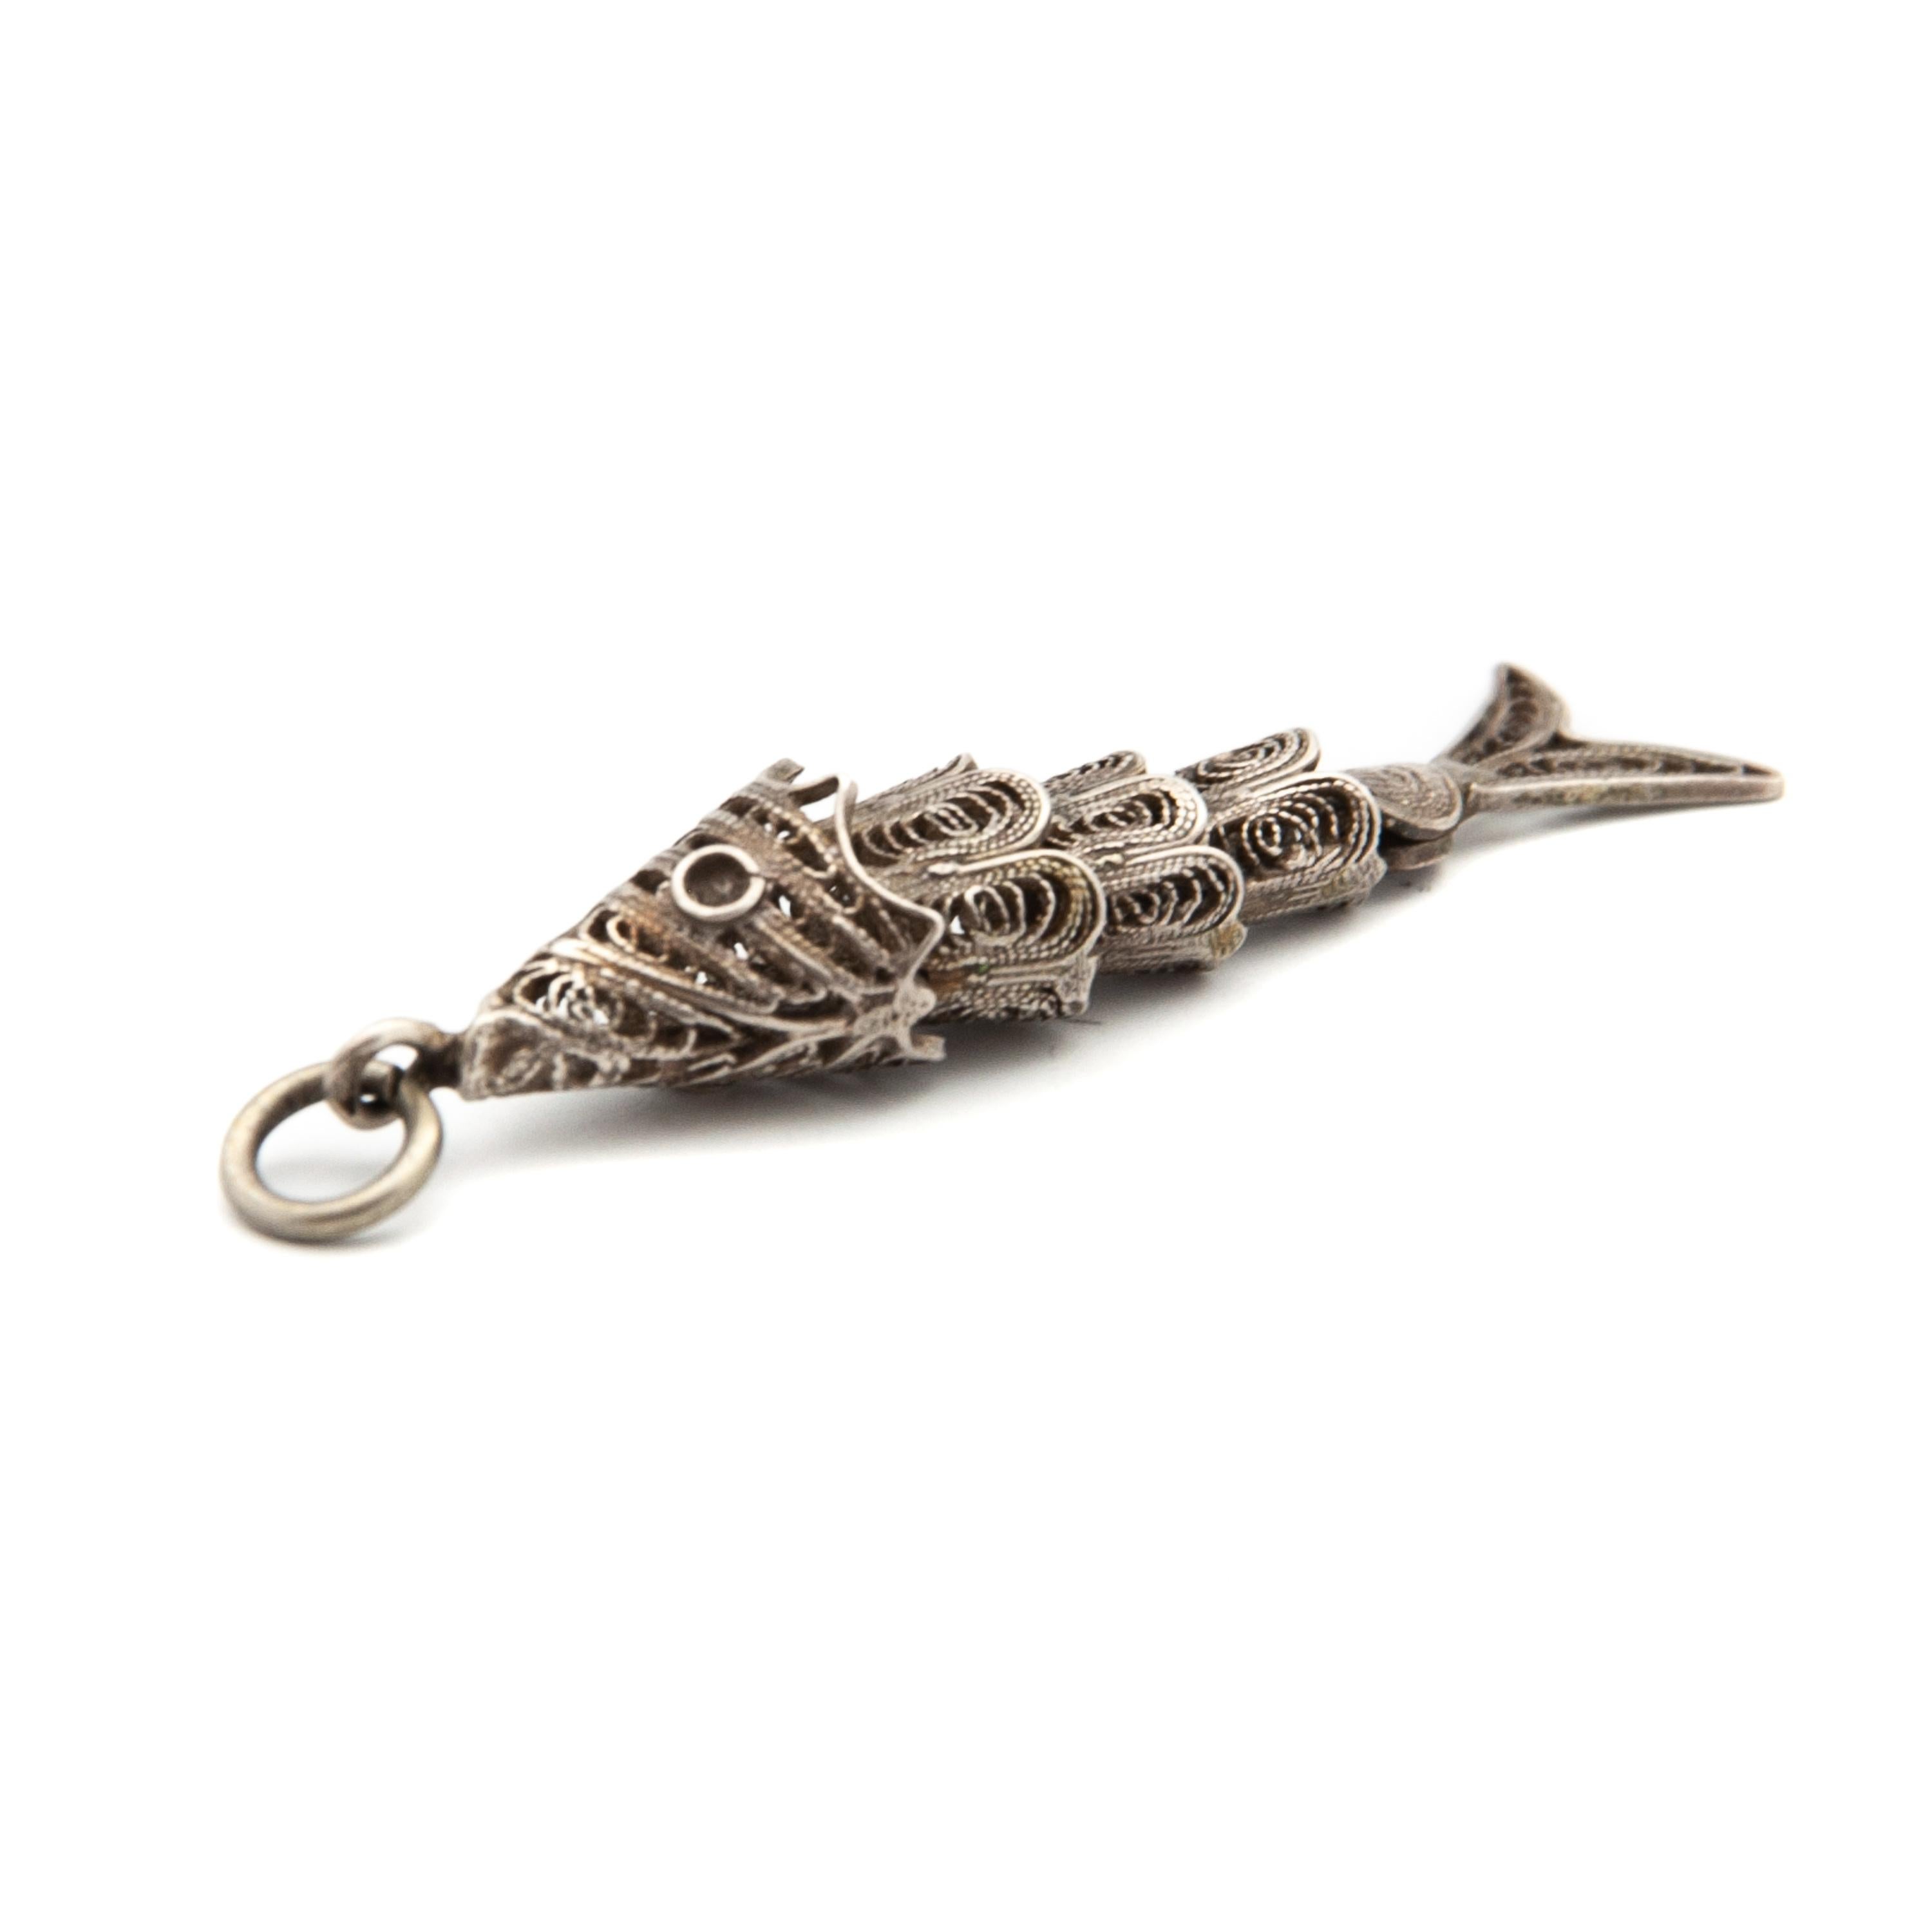 Vintage Articulated Filigree Fish Silver Charm Pendant 1